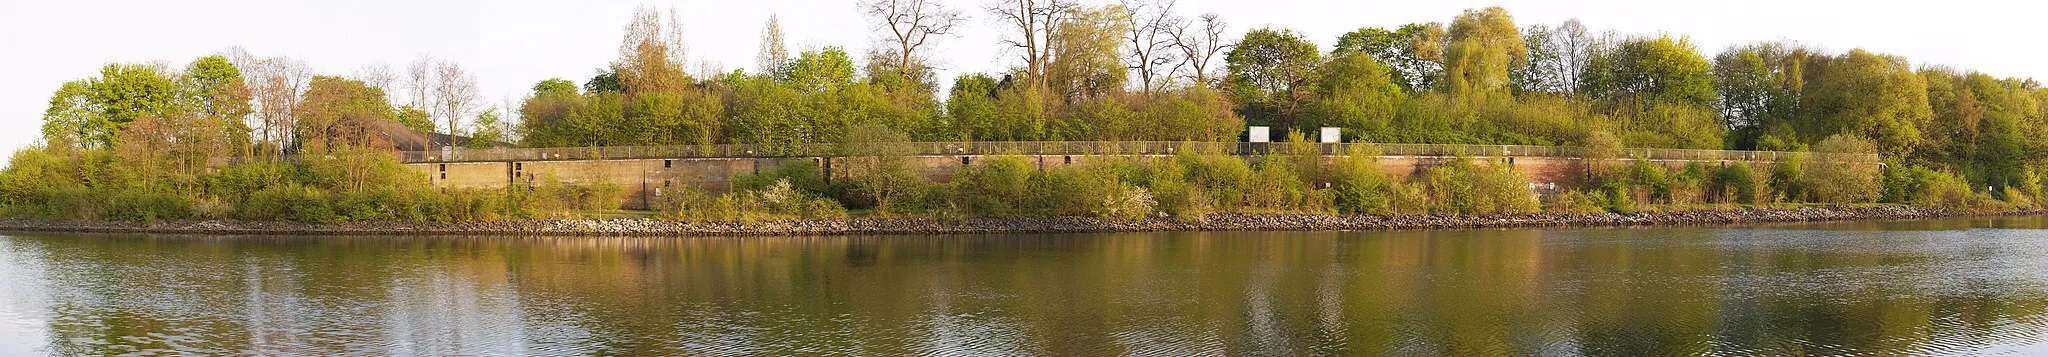 Photo showing: Former lock Herne-West at the Rhein-Herne-Kanal (Panorama of 5 pictures)